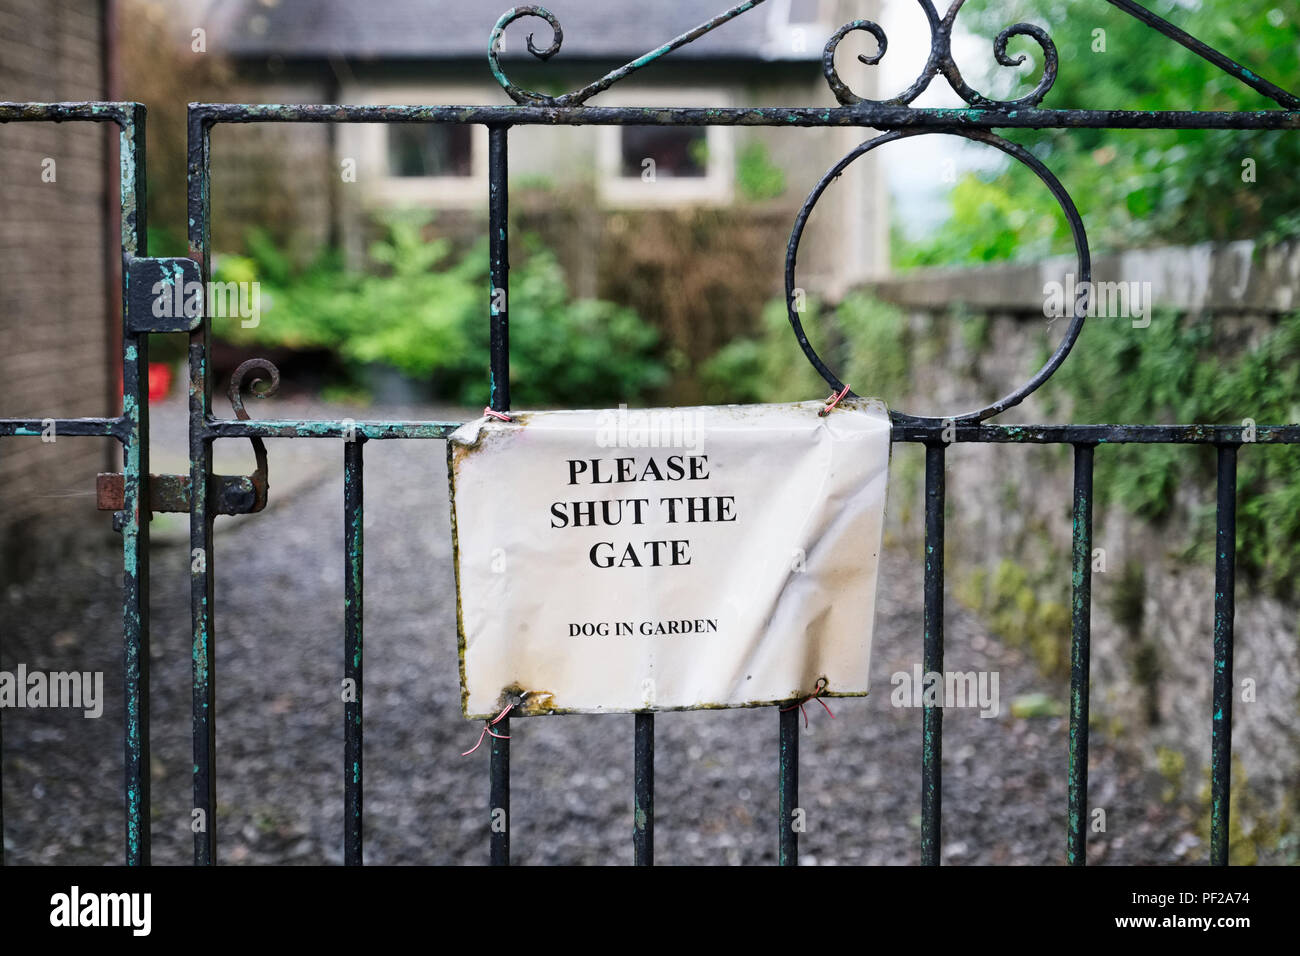 Please shut the gate sign at entrance to residential garden Stock Photo